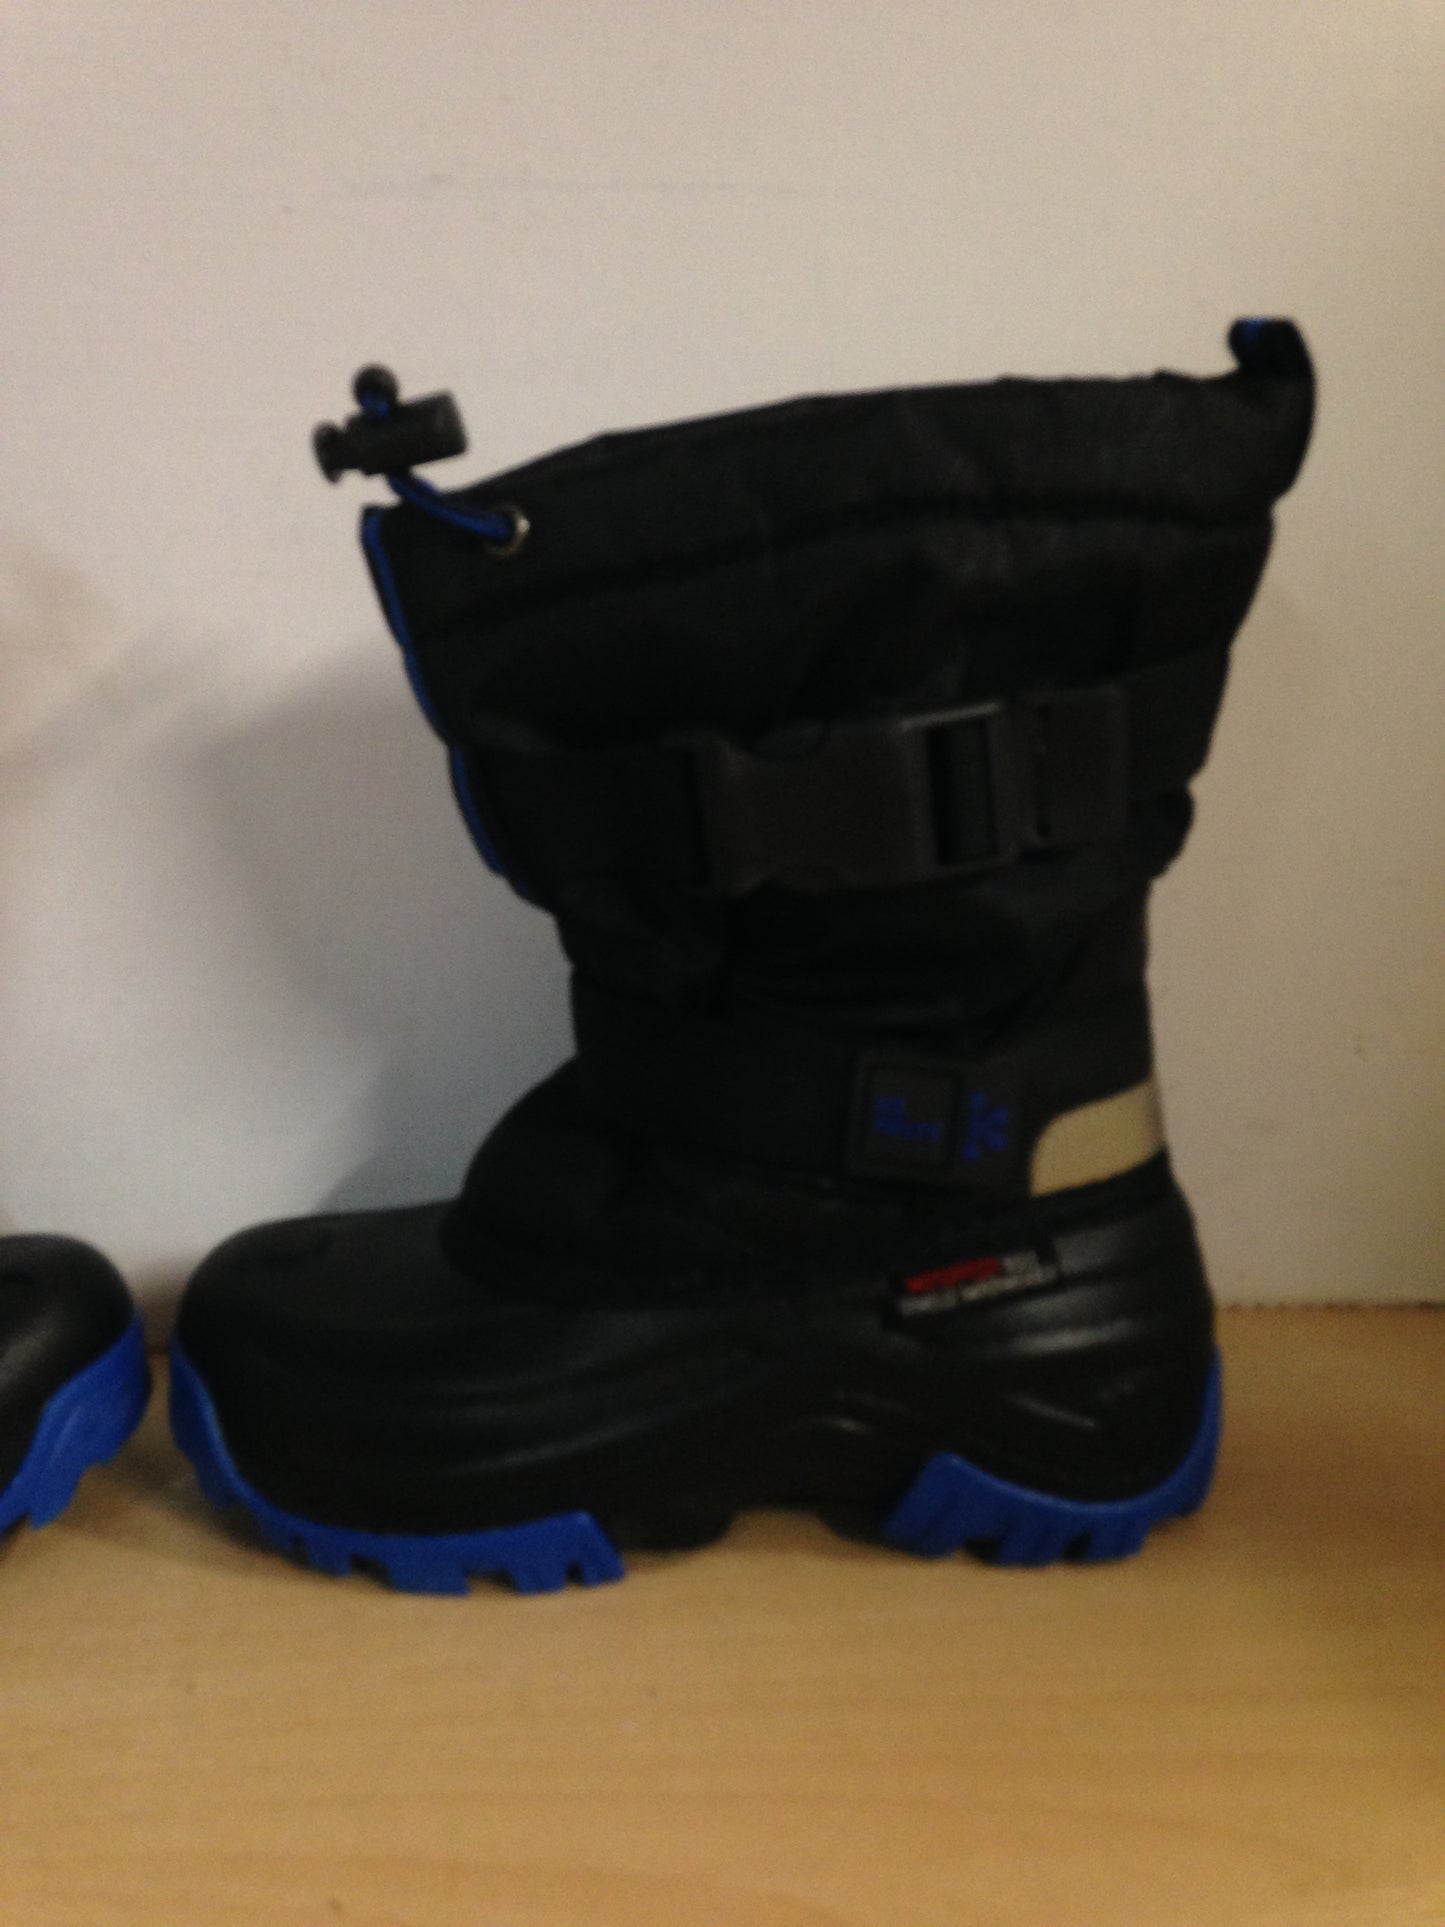 Winter Boots Child Size 1 Ice Fields Black Blue Excellent